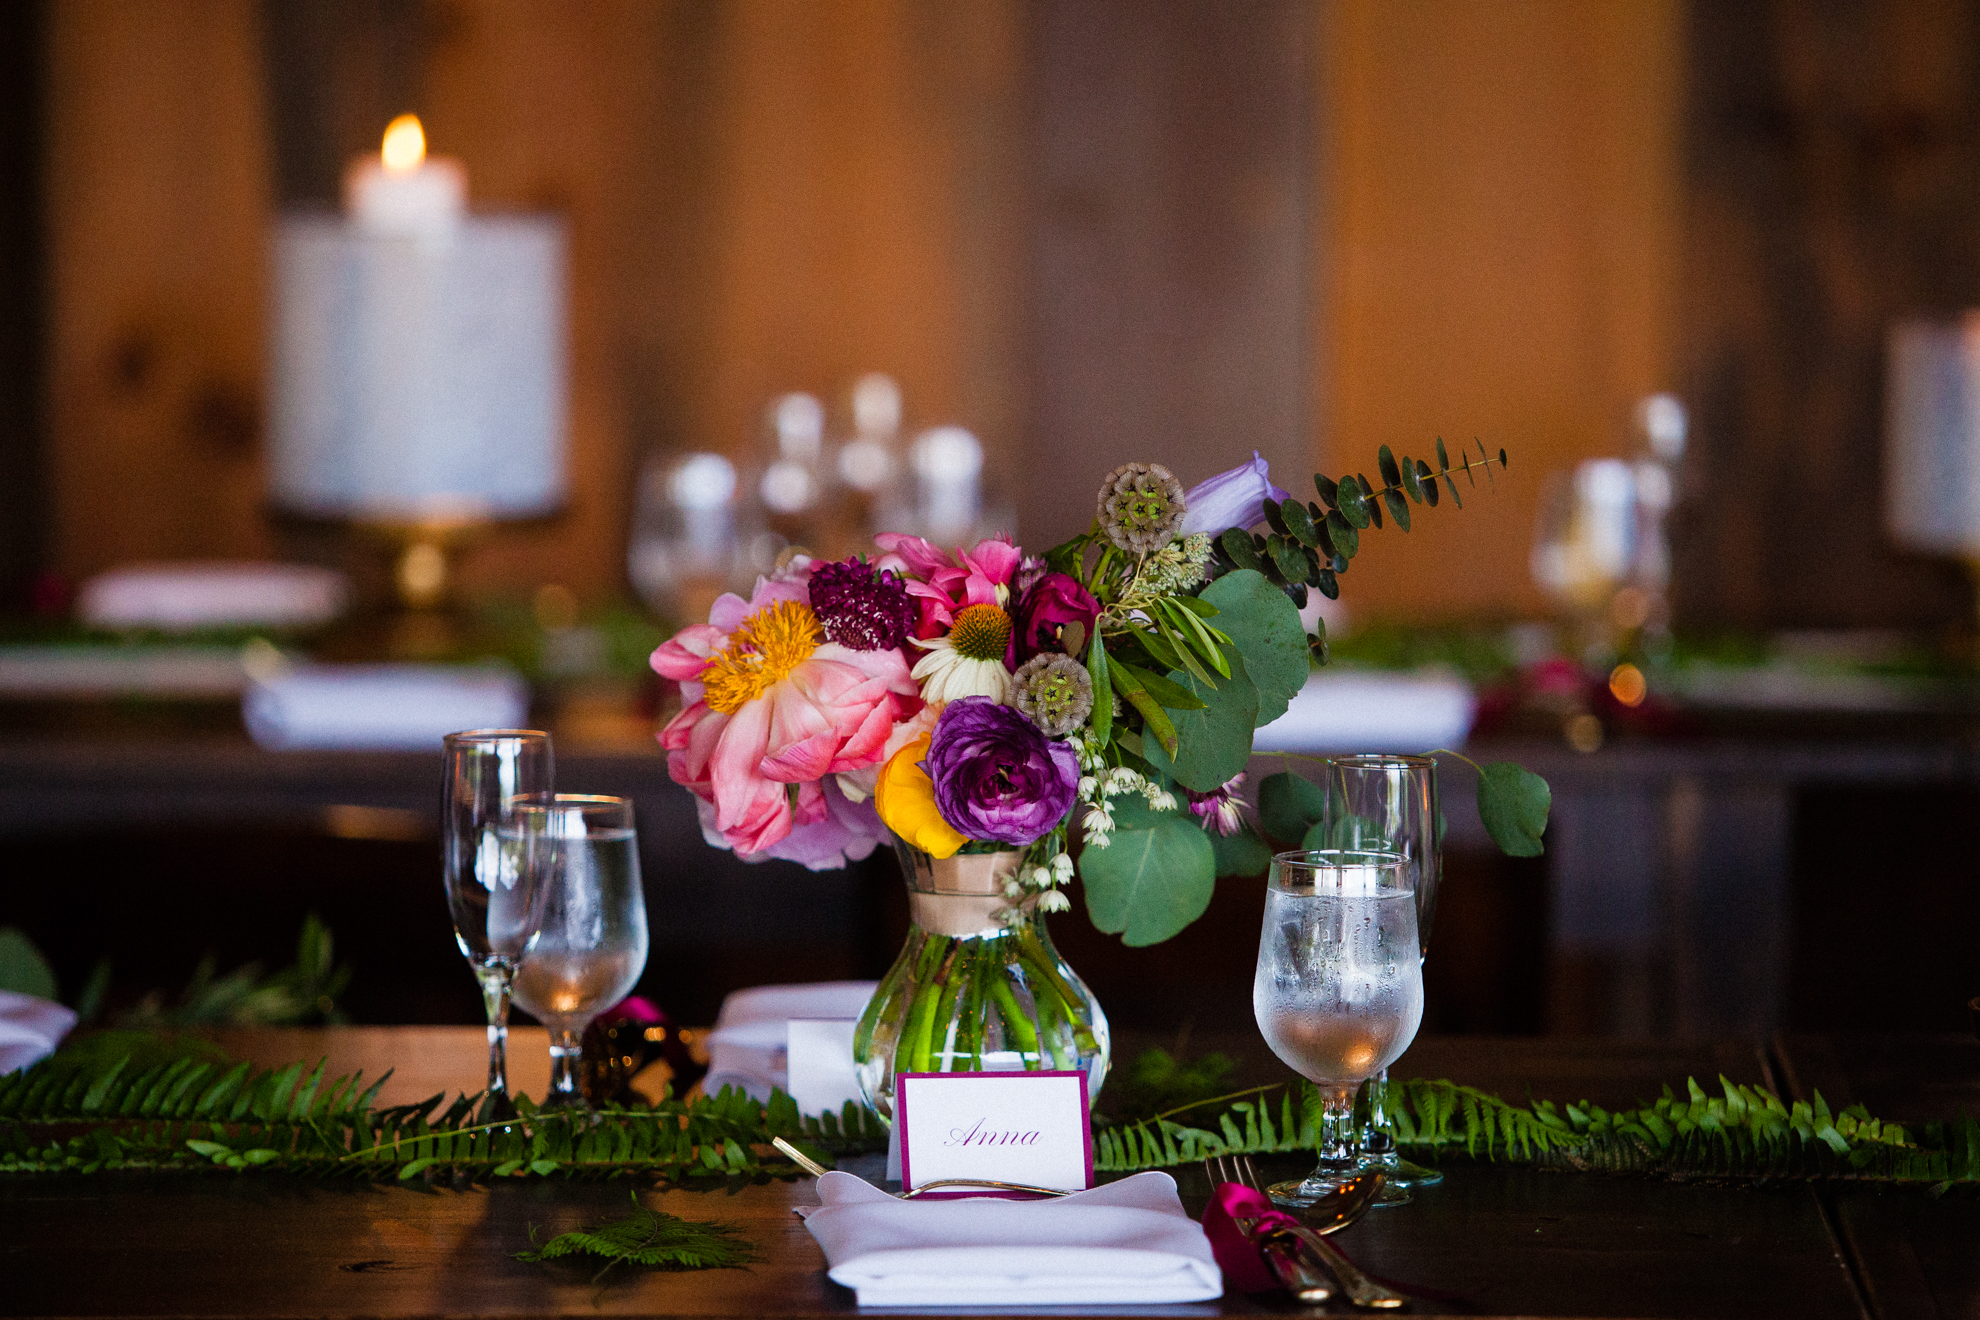 brightly colored flowers adorned the rustic wooden tables during this summertime wedding in the mountains